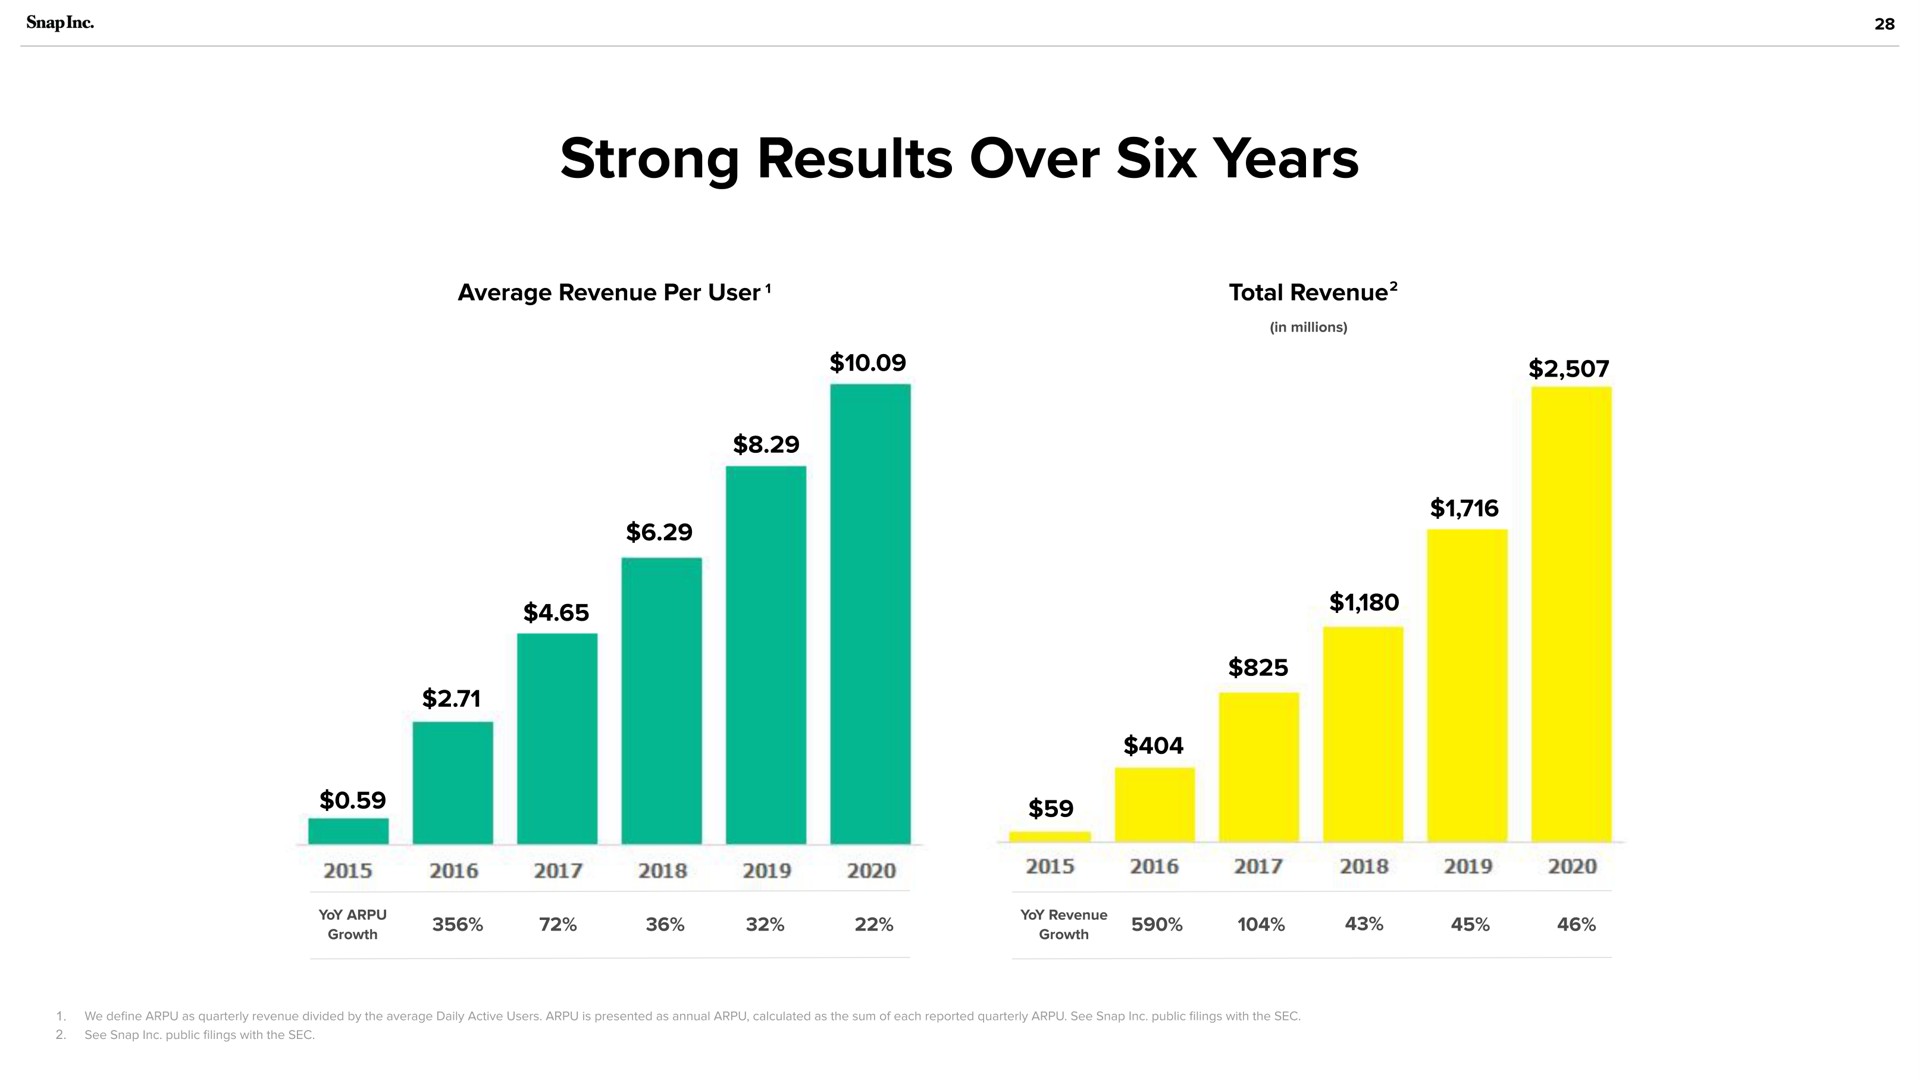 strong results over six years | Snap Inc